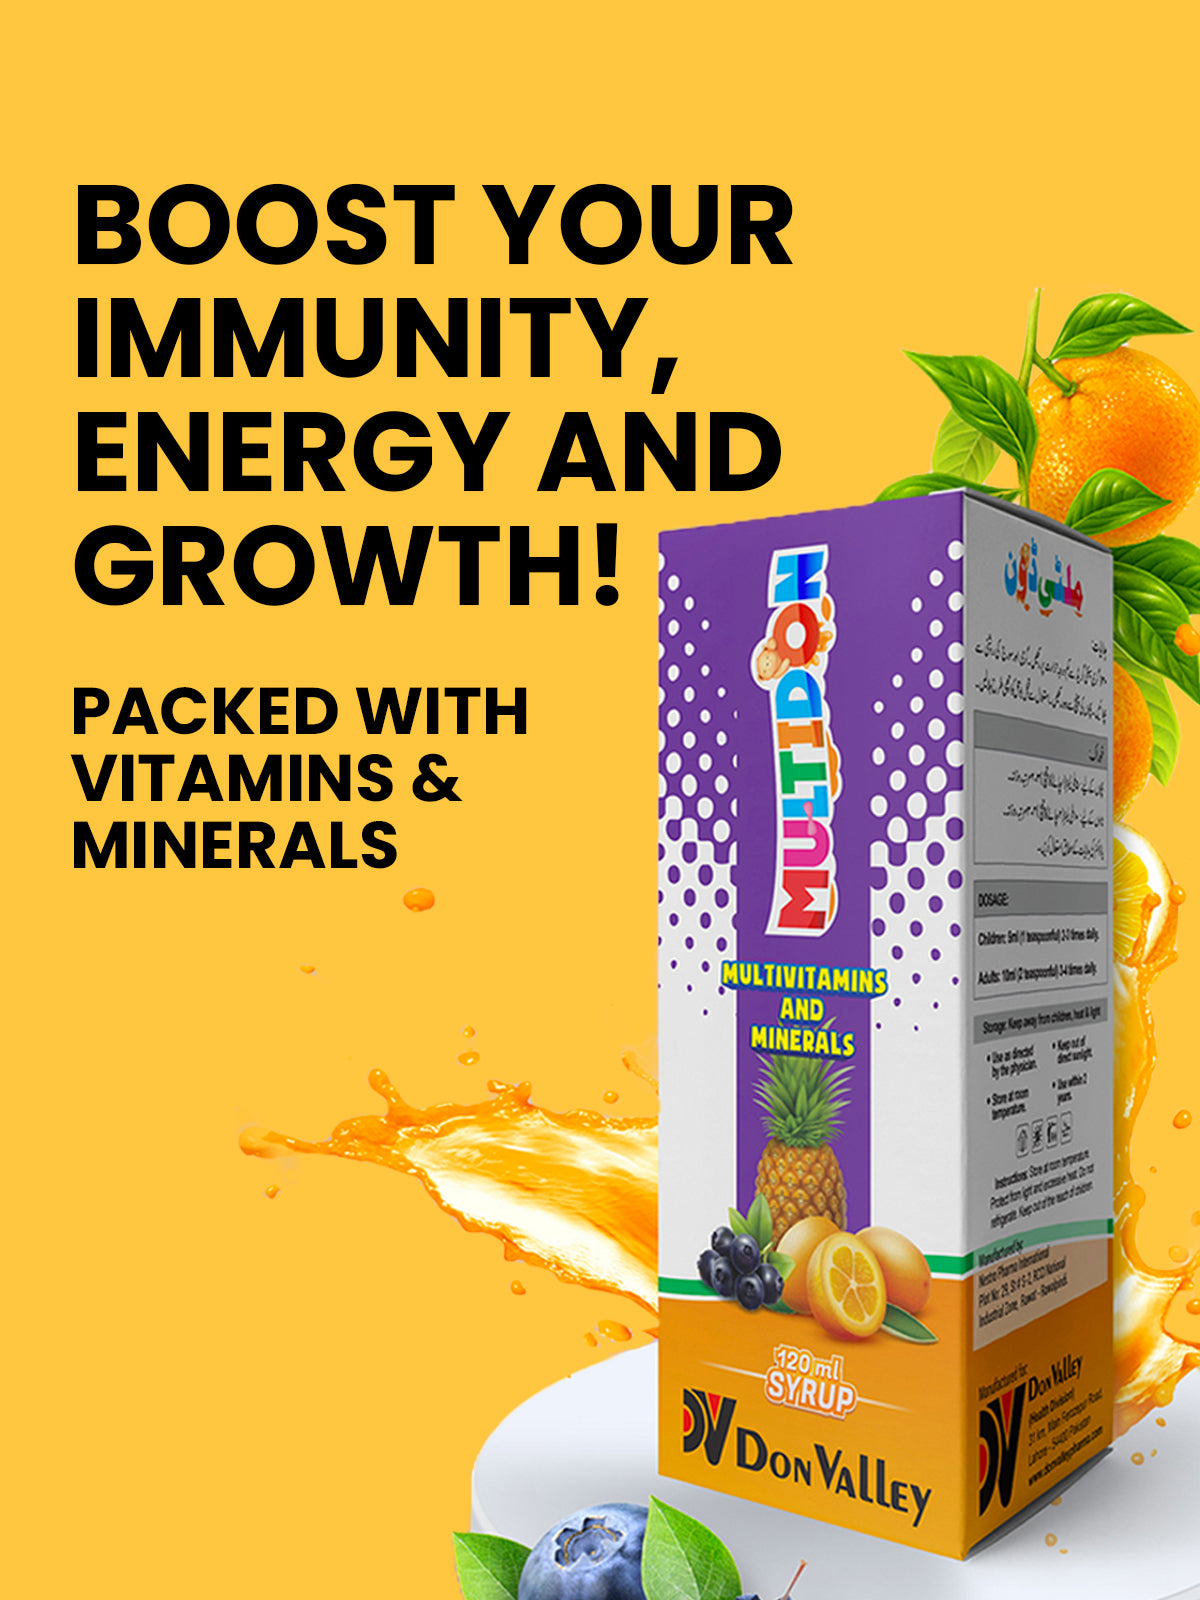 MULTIDON—Multivitamin Syrup with Minerals